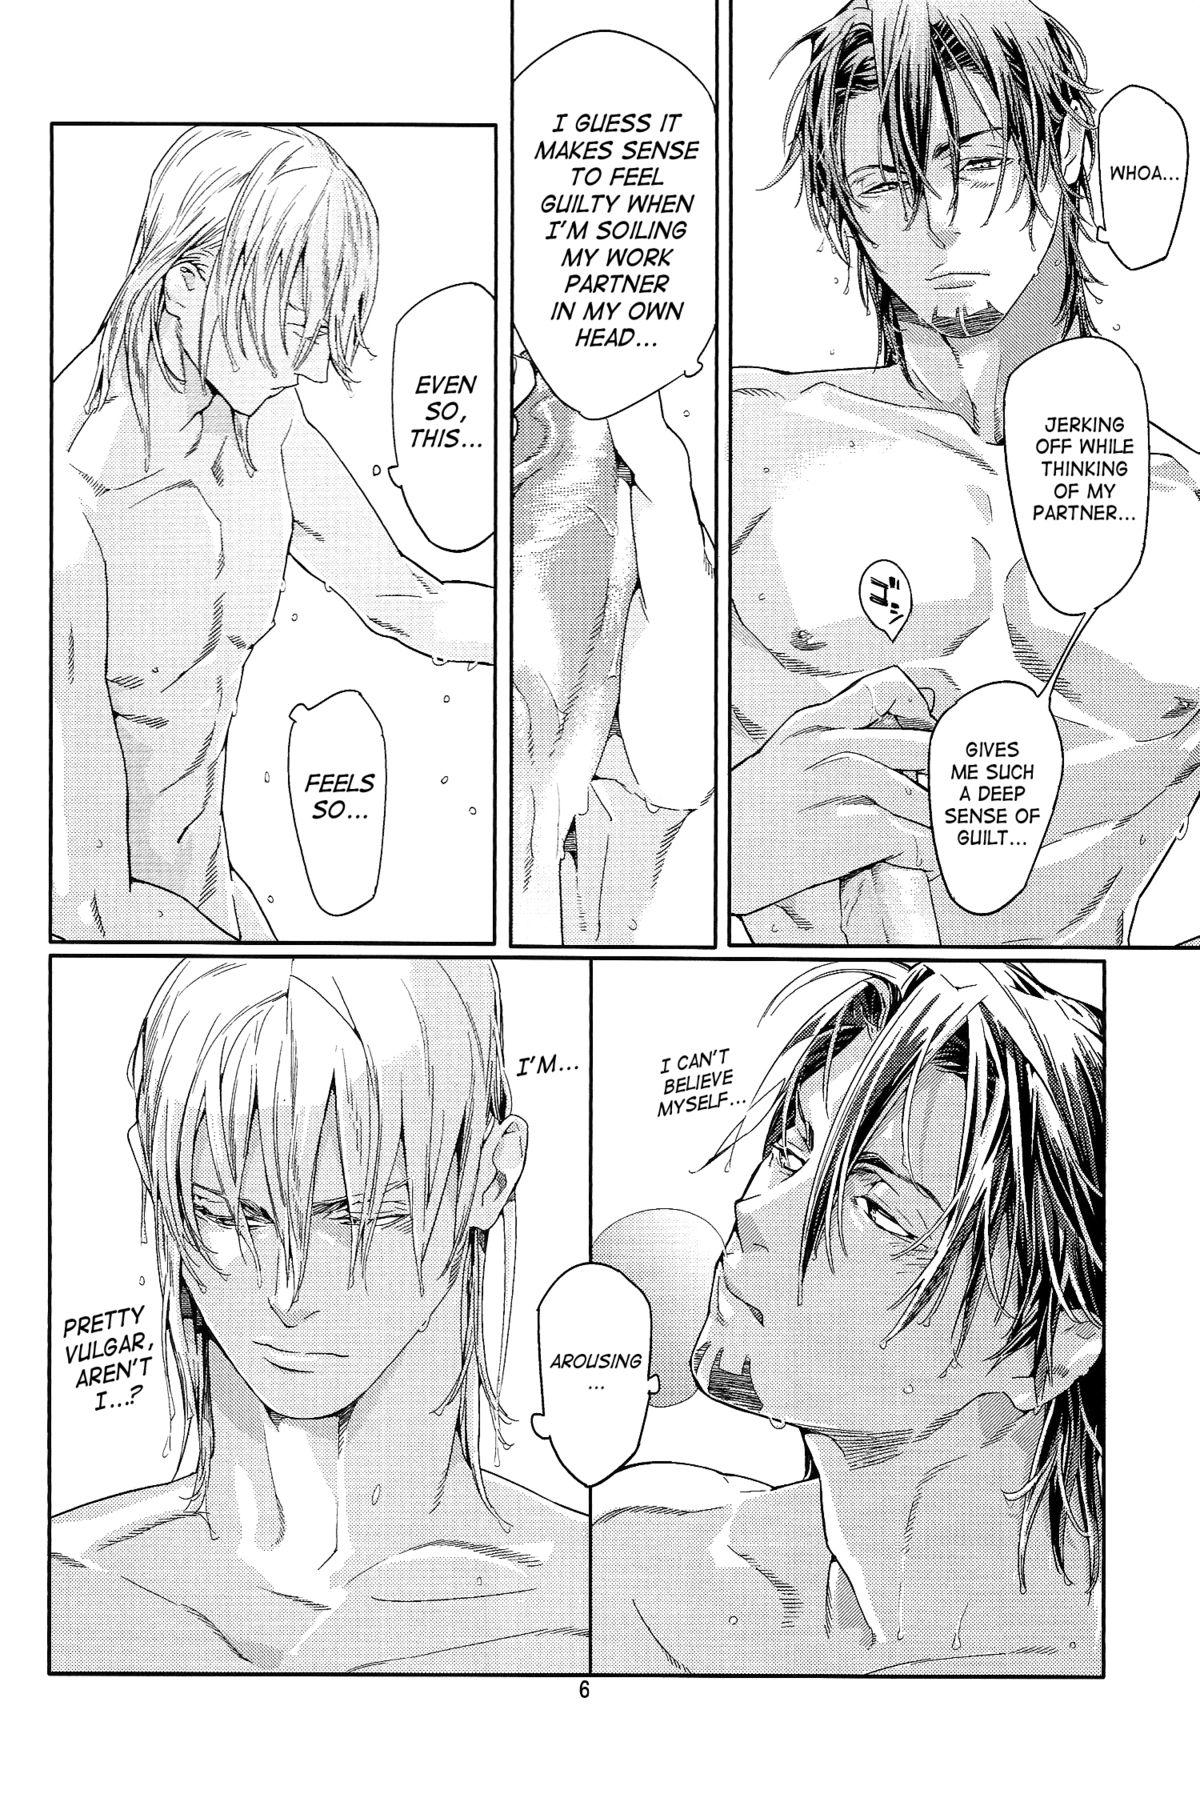 Euro Porn CANDY MAN Vol. 3 - Tiger and bunny Amateur Pussy - Page 4